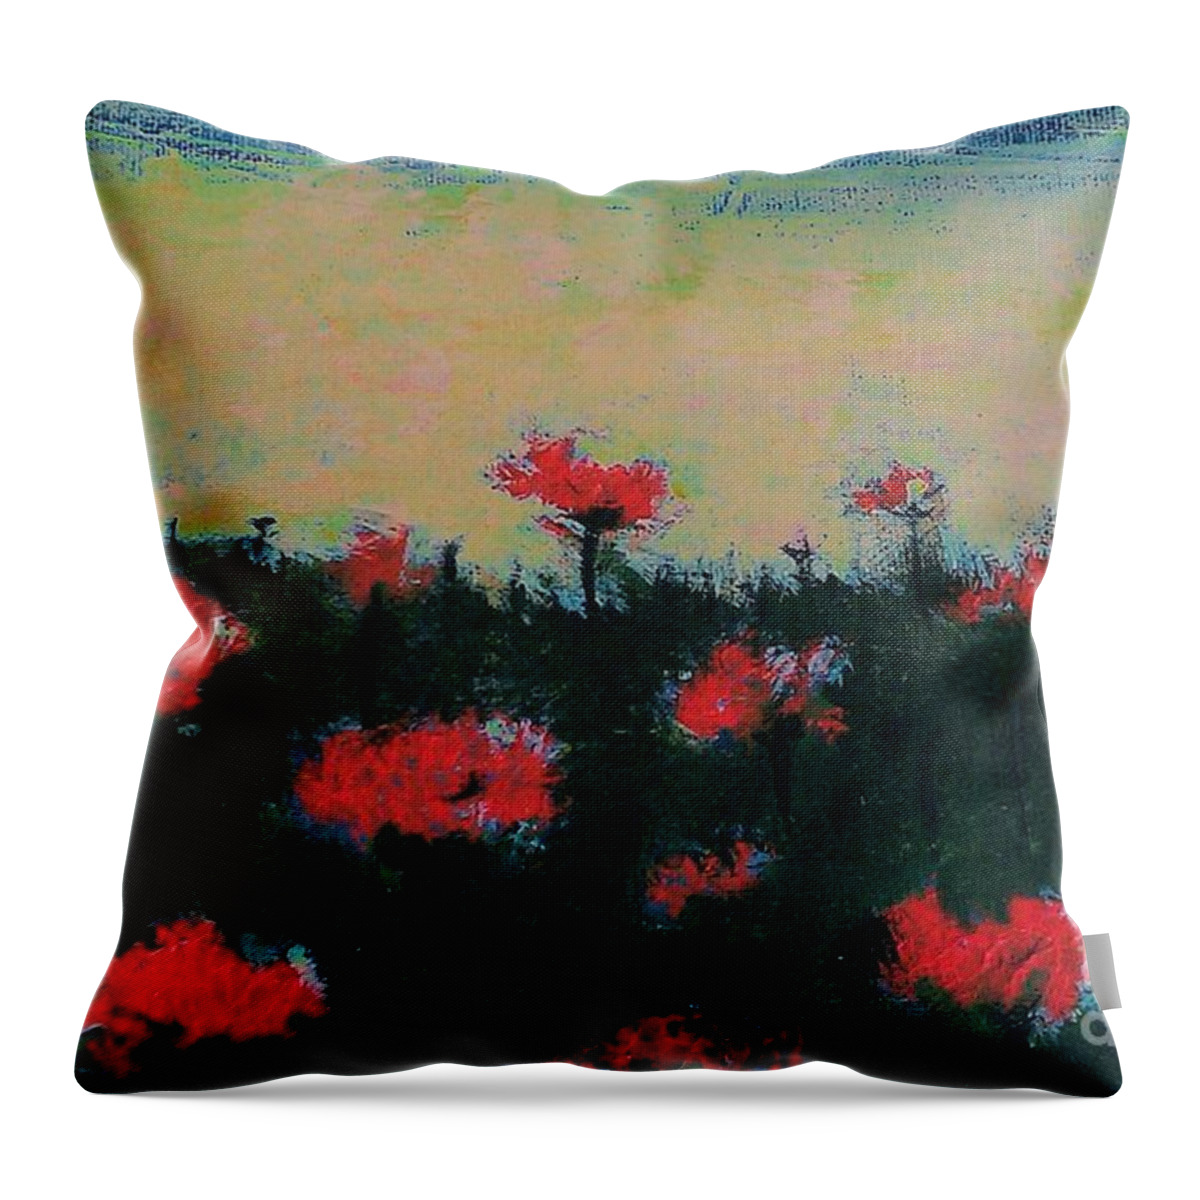 Poppy Throw Pillow featuring the painting Poppy Field by Jacqueline McReynolds